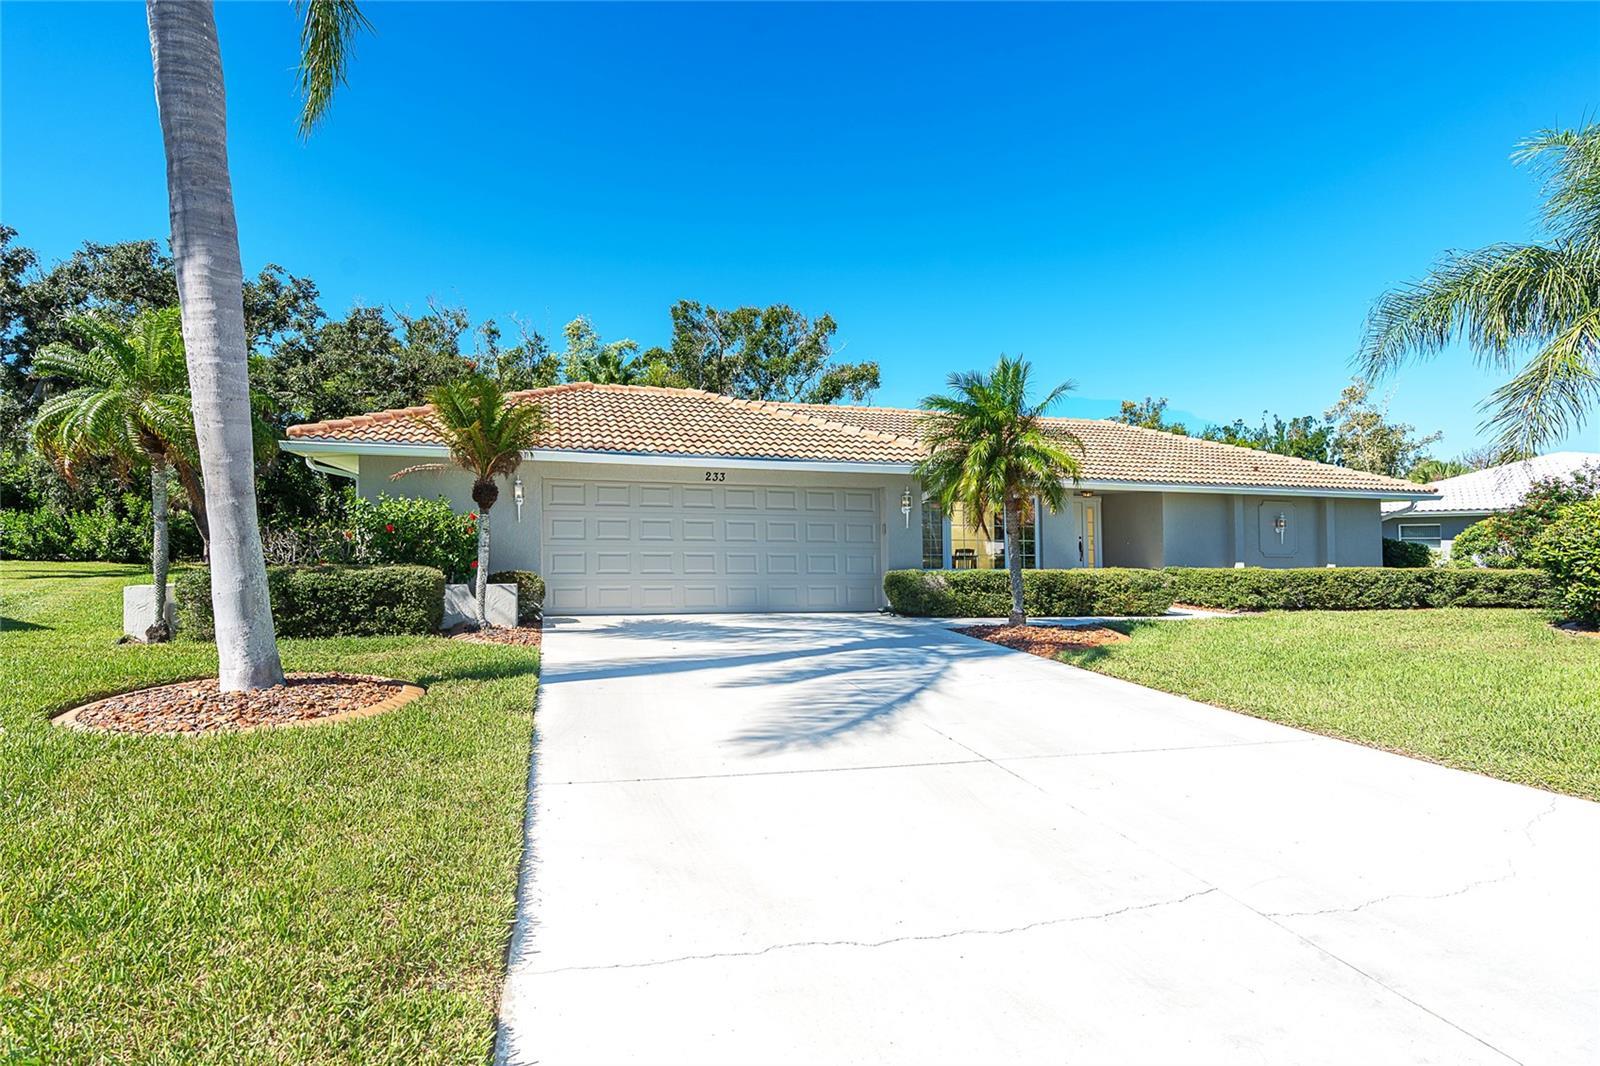 Photo one of 233 Woodland Dr Englewood FL 34223 | MLS D6134004